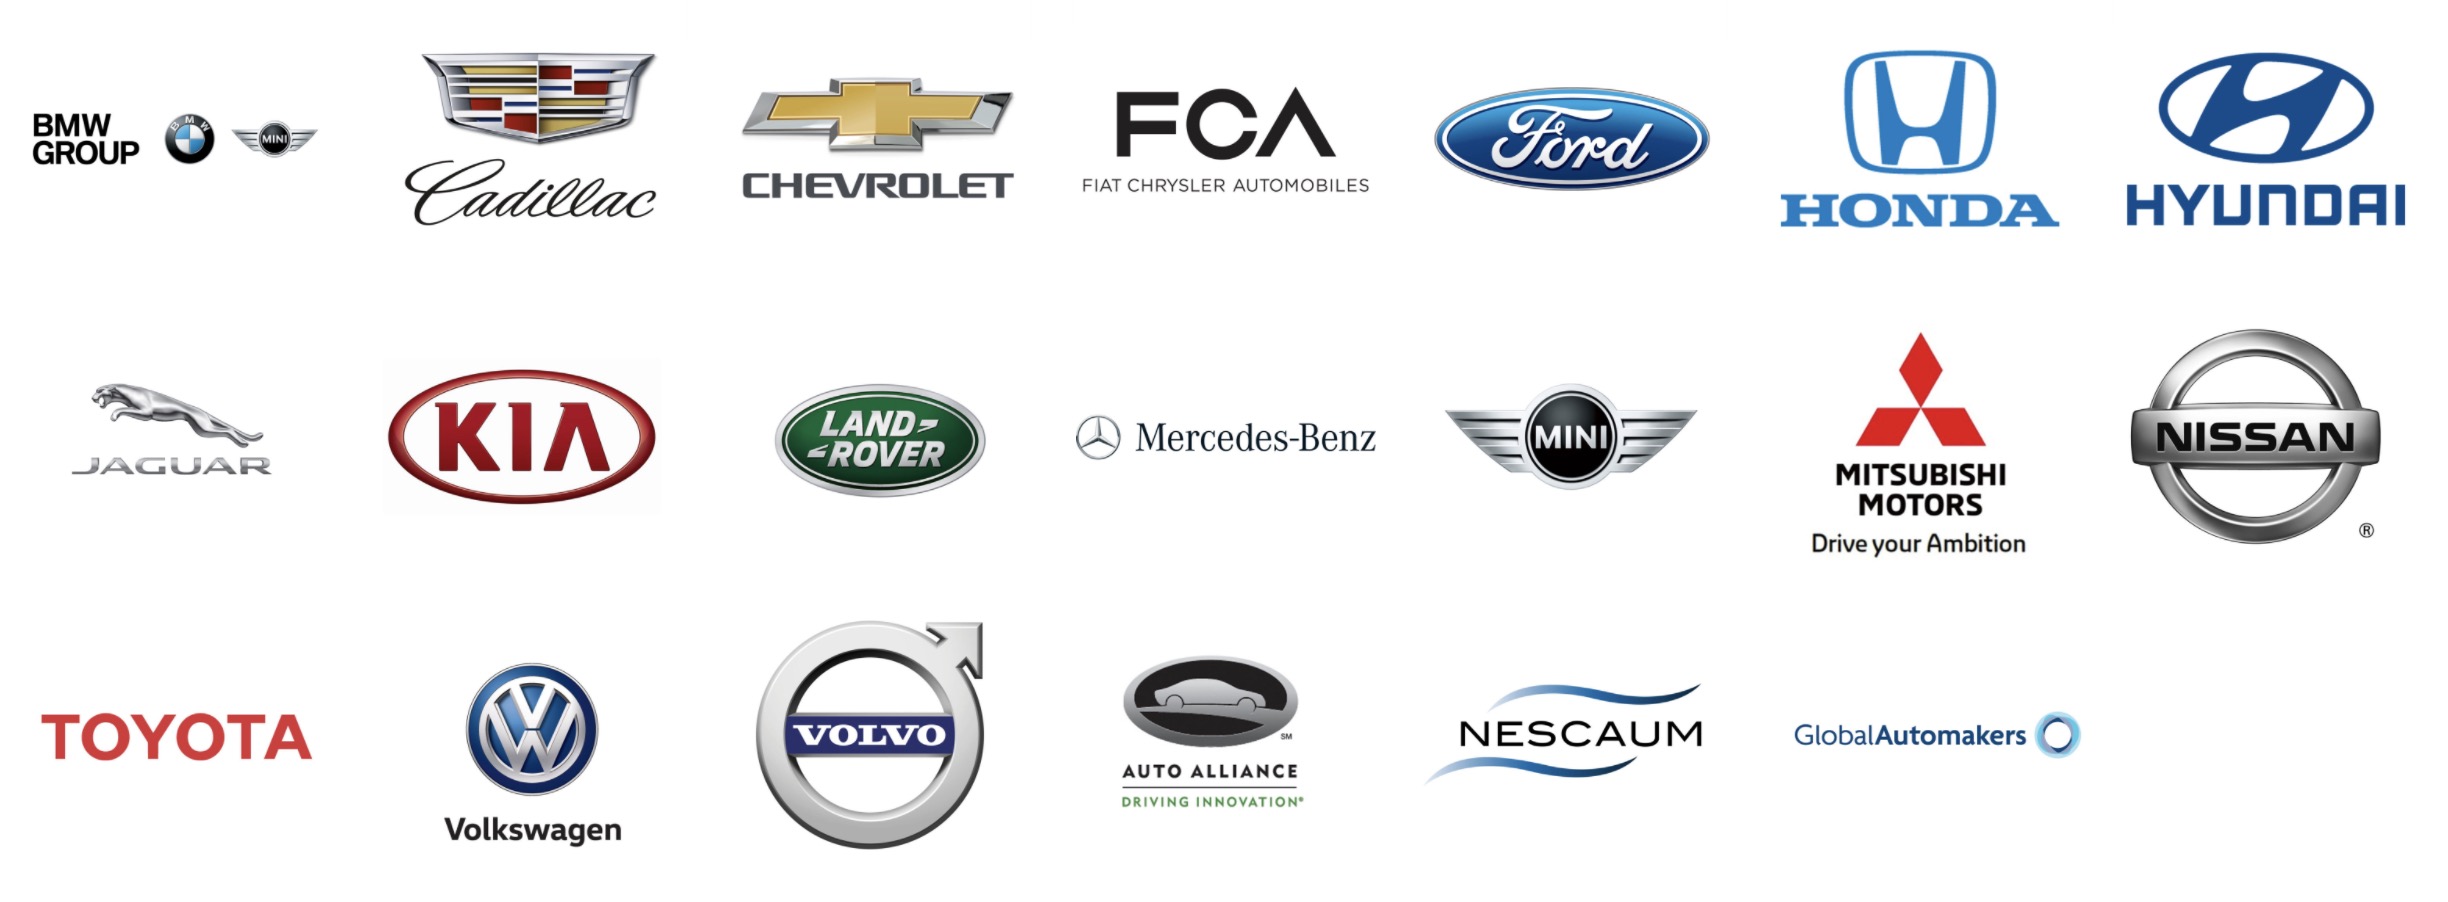 Major automakers team up to launch electric vehicle marketing effort in